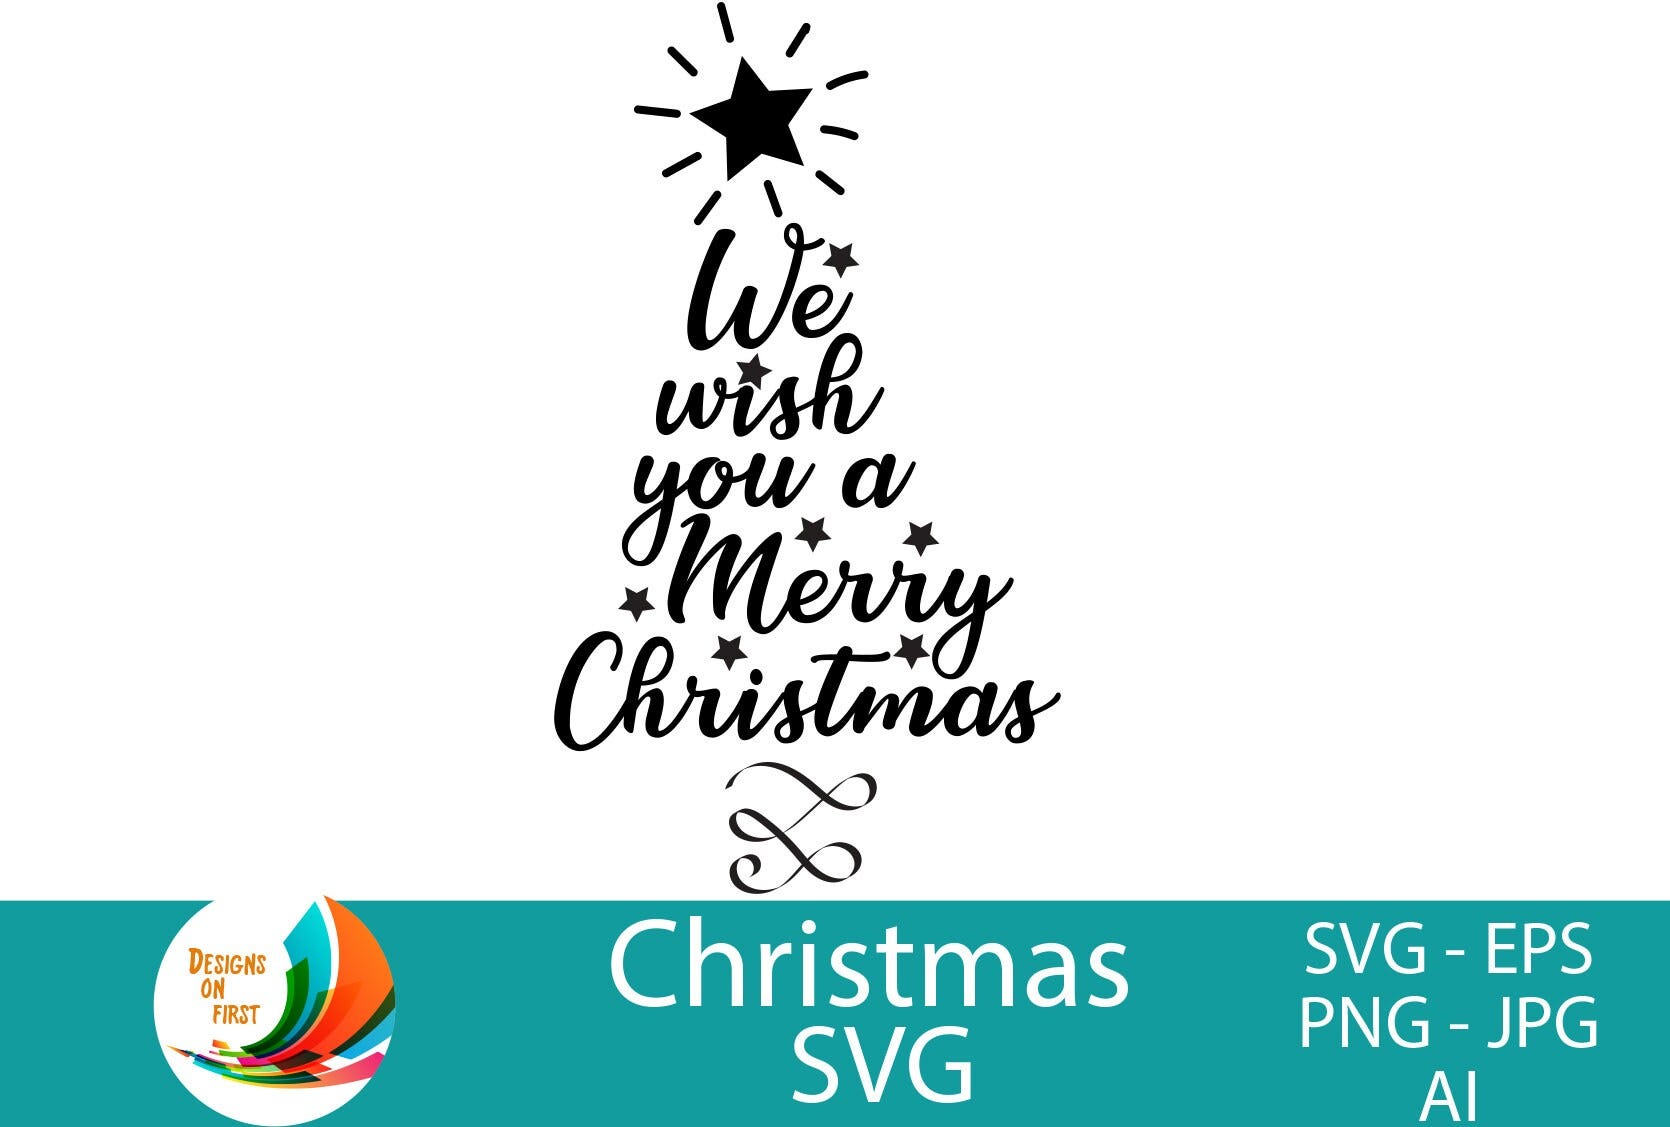 Christmas Tree Svg | We wish you a Merry Christmas svg | Merry Christmas svg | Digital cut file | Winter svg | Hand lettered